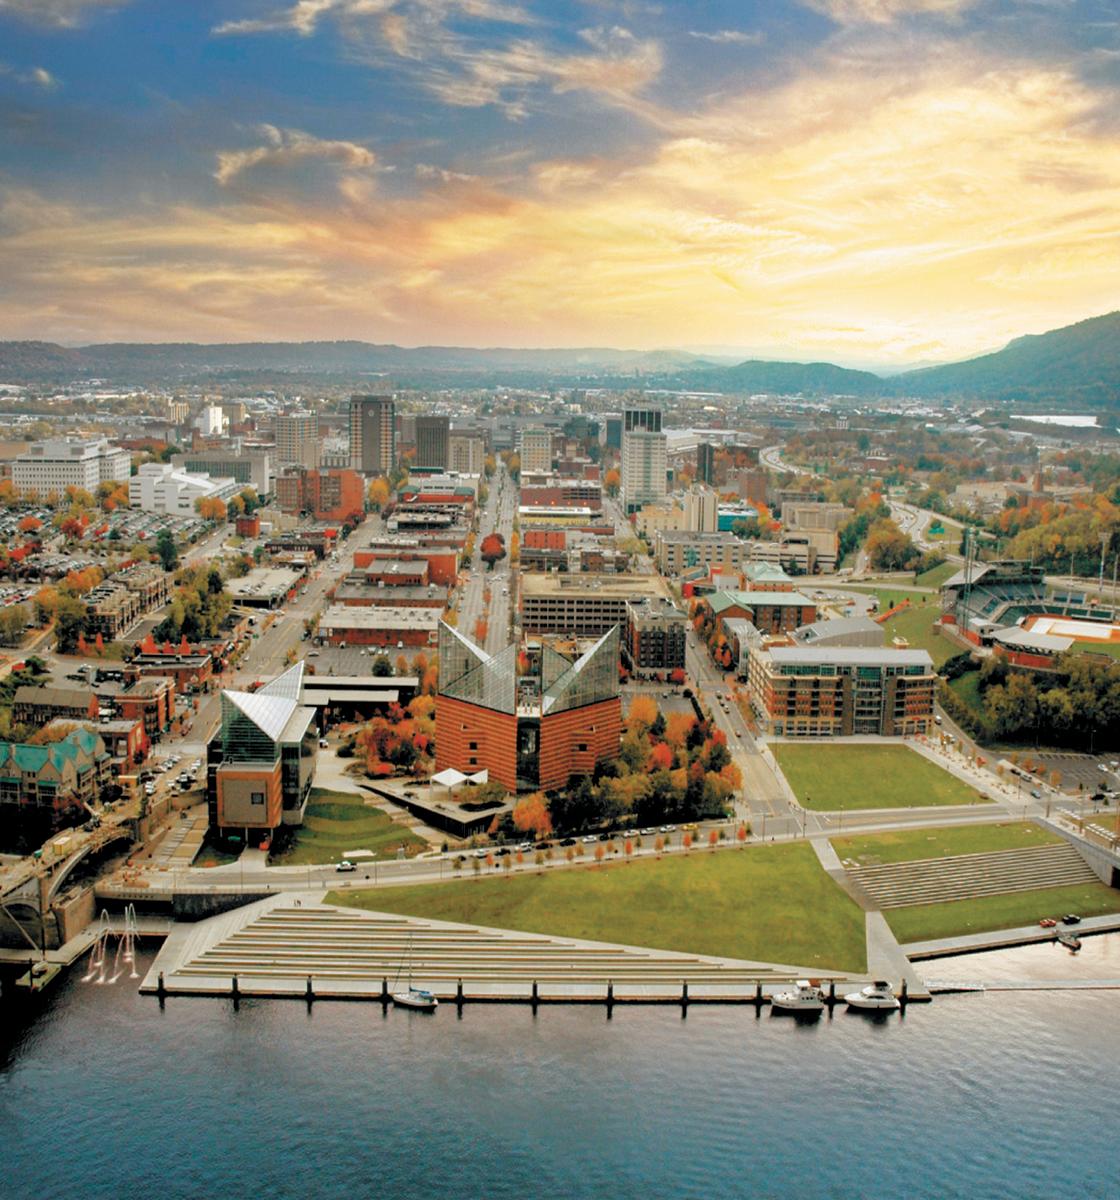 Things to Do in Chattanooga Shopping, Restaurants & Events